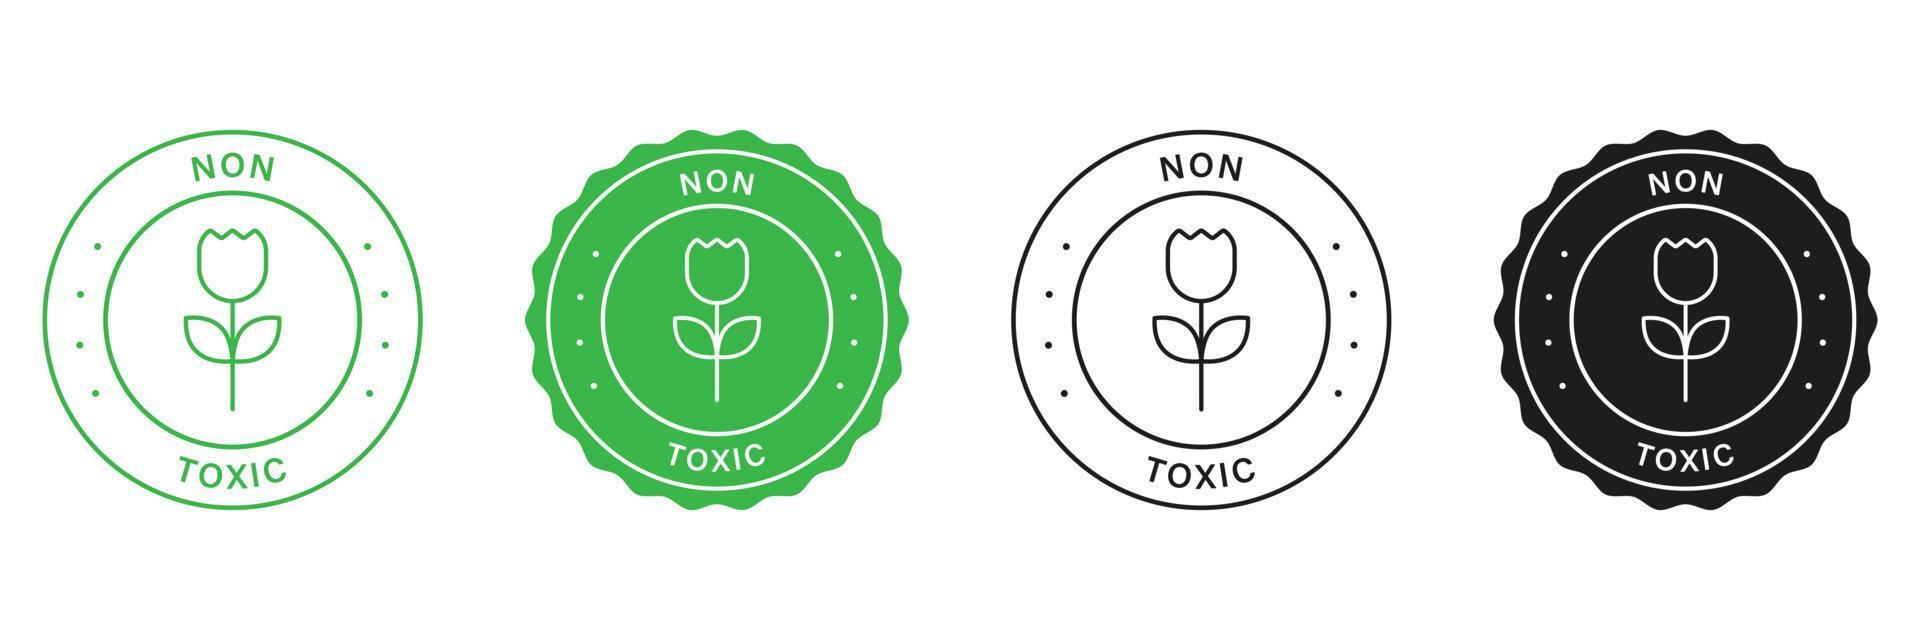 https://static.vecteezy.com/system/resources/previews/021/978/184/non_2x/safe-product-stamp-set-non-toxic-symbol-free-chemical-icons-green-and-black-labels-with-ecological-guarantee-eco-clean-sticker-organic-safety-non-toxic-sign-isolated-illustration-vector.jpg